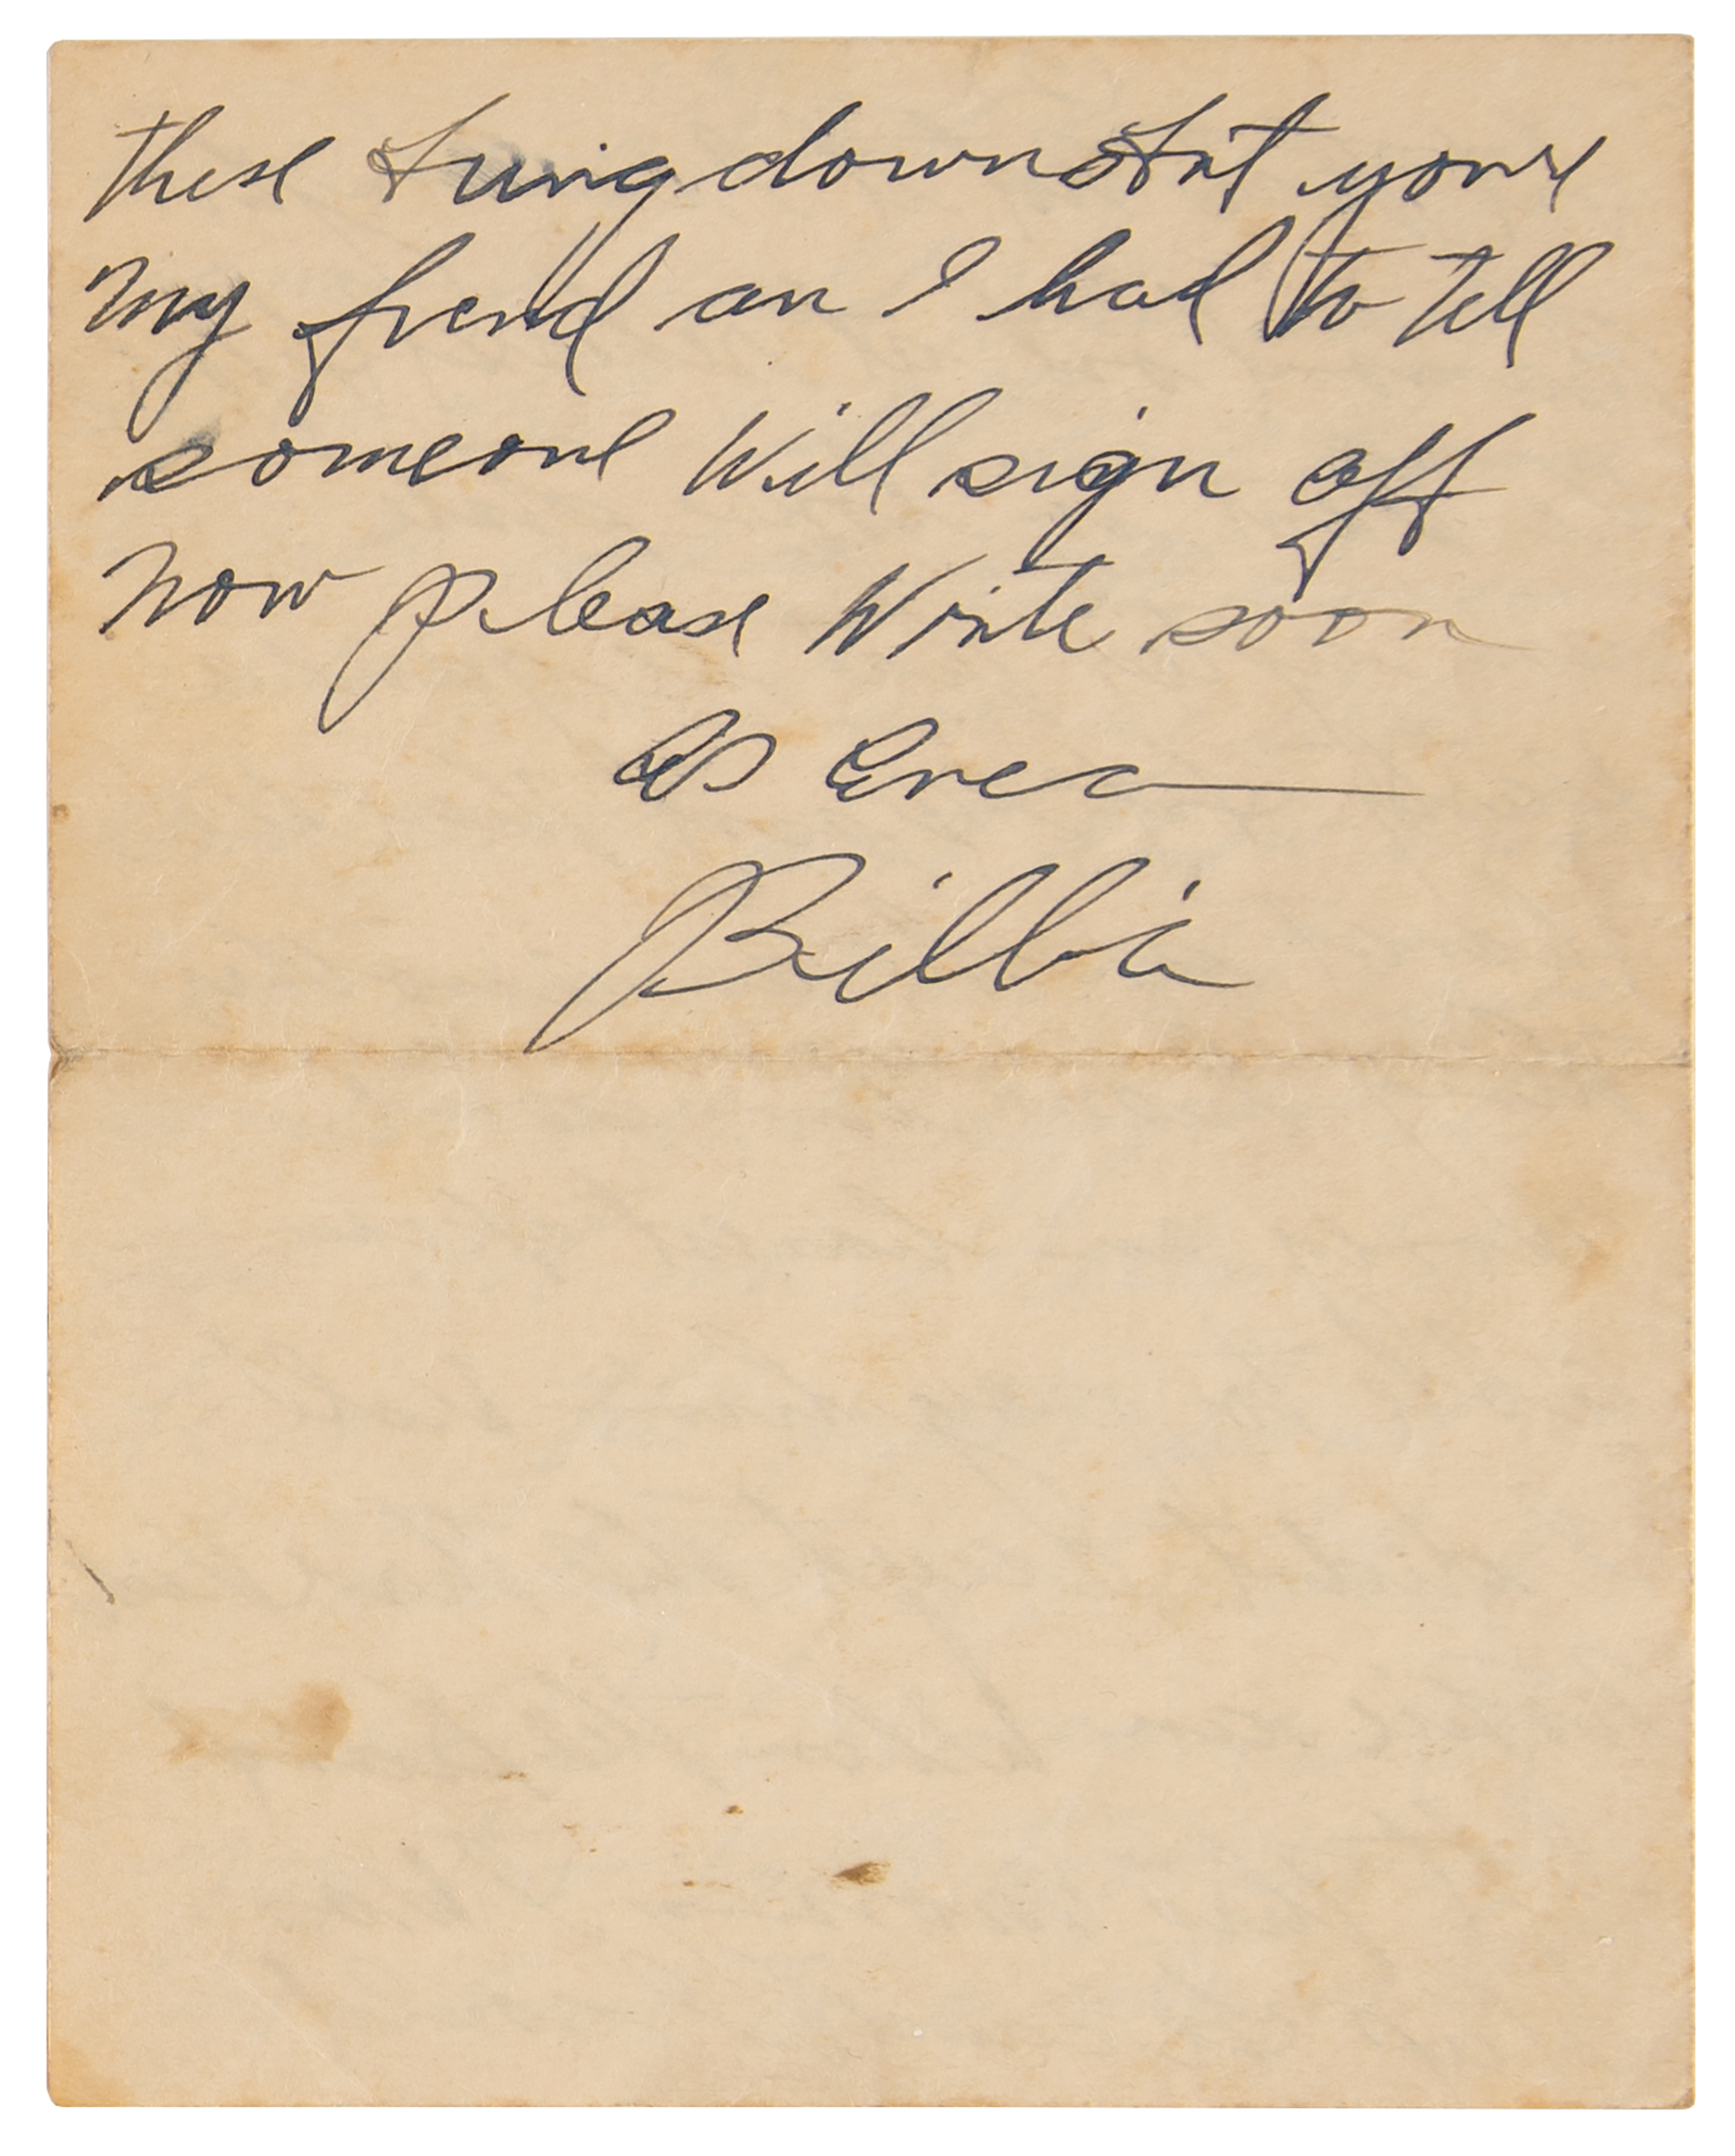 Lot #4039 Billie Holiday Autograph Letter Signed on Being Fired from Count Basie's Band: "I would never sing again, but I still have Mama to take care of" - Image 4